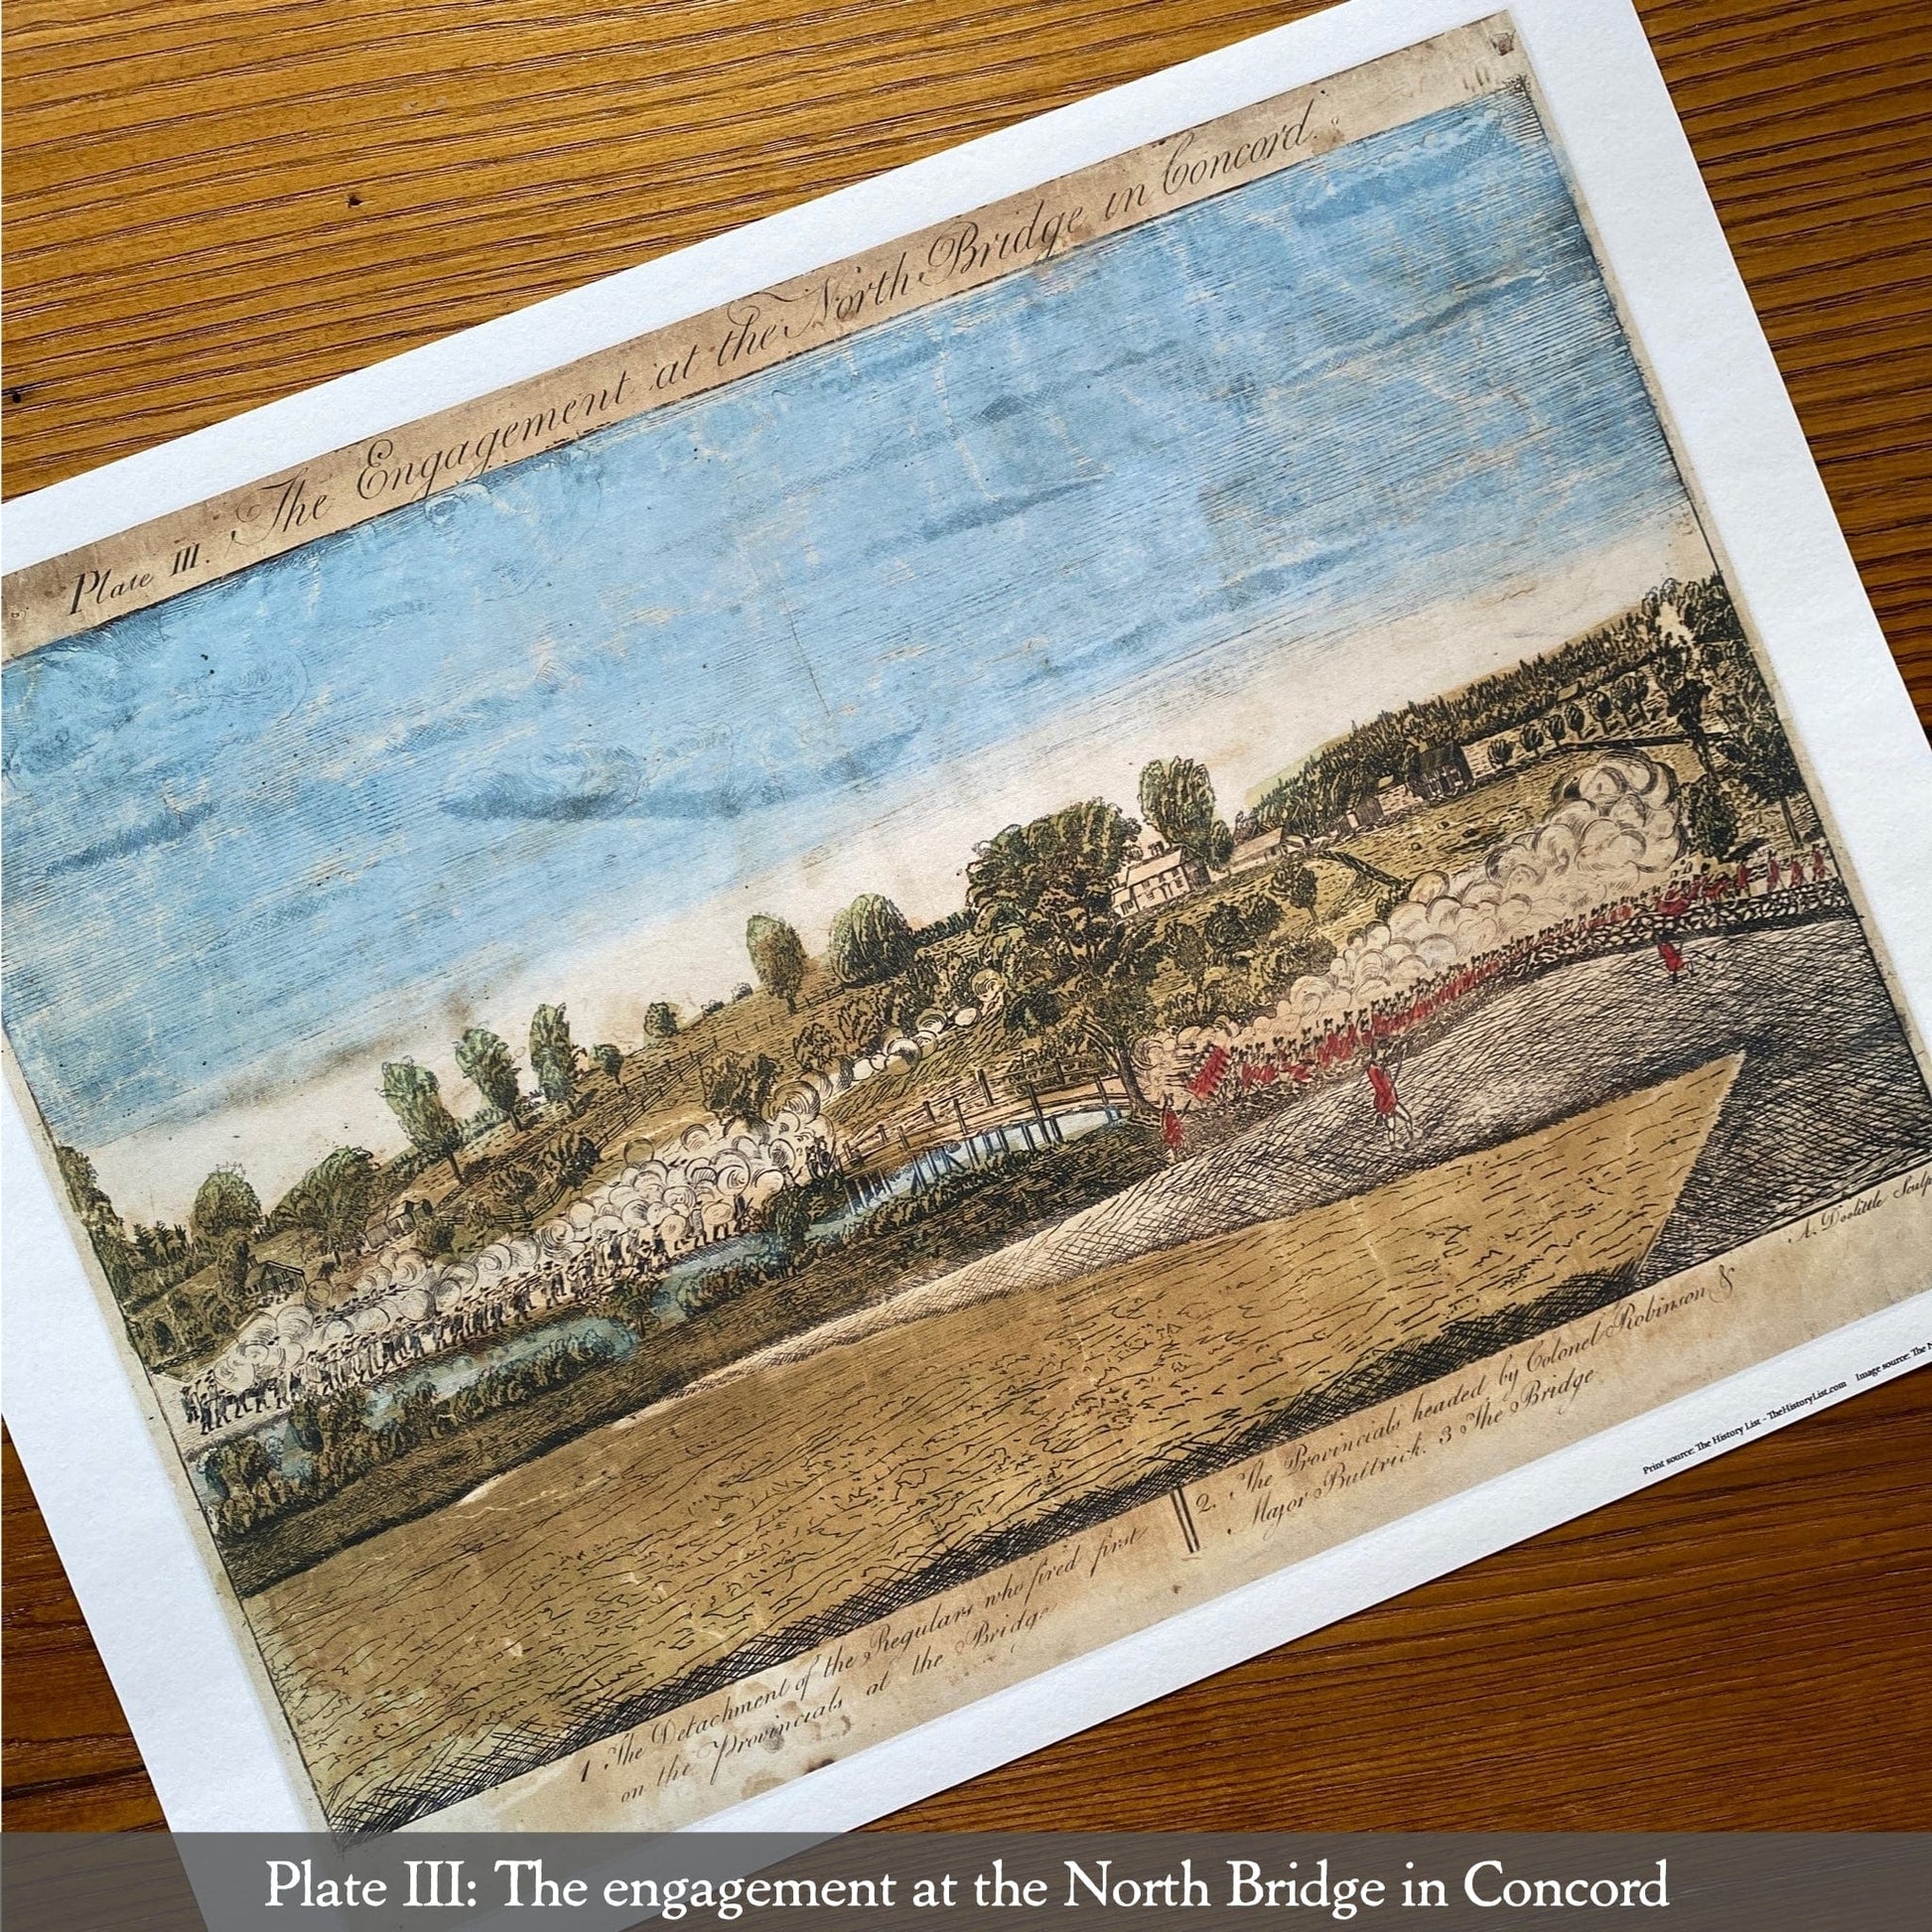 Plate 3: Th engagement at the North Bridge in Concord - "The Doolittle Engravings of the Battle of Lexington and Concord" Archival Print from the history list store